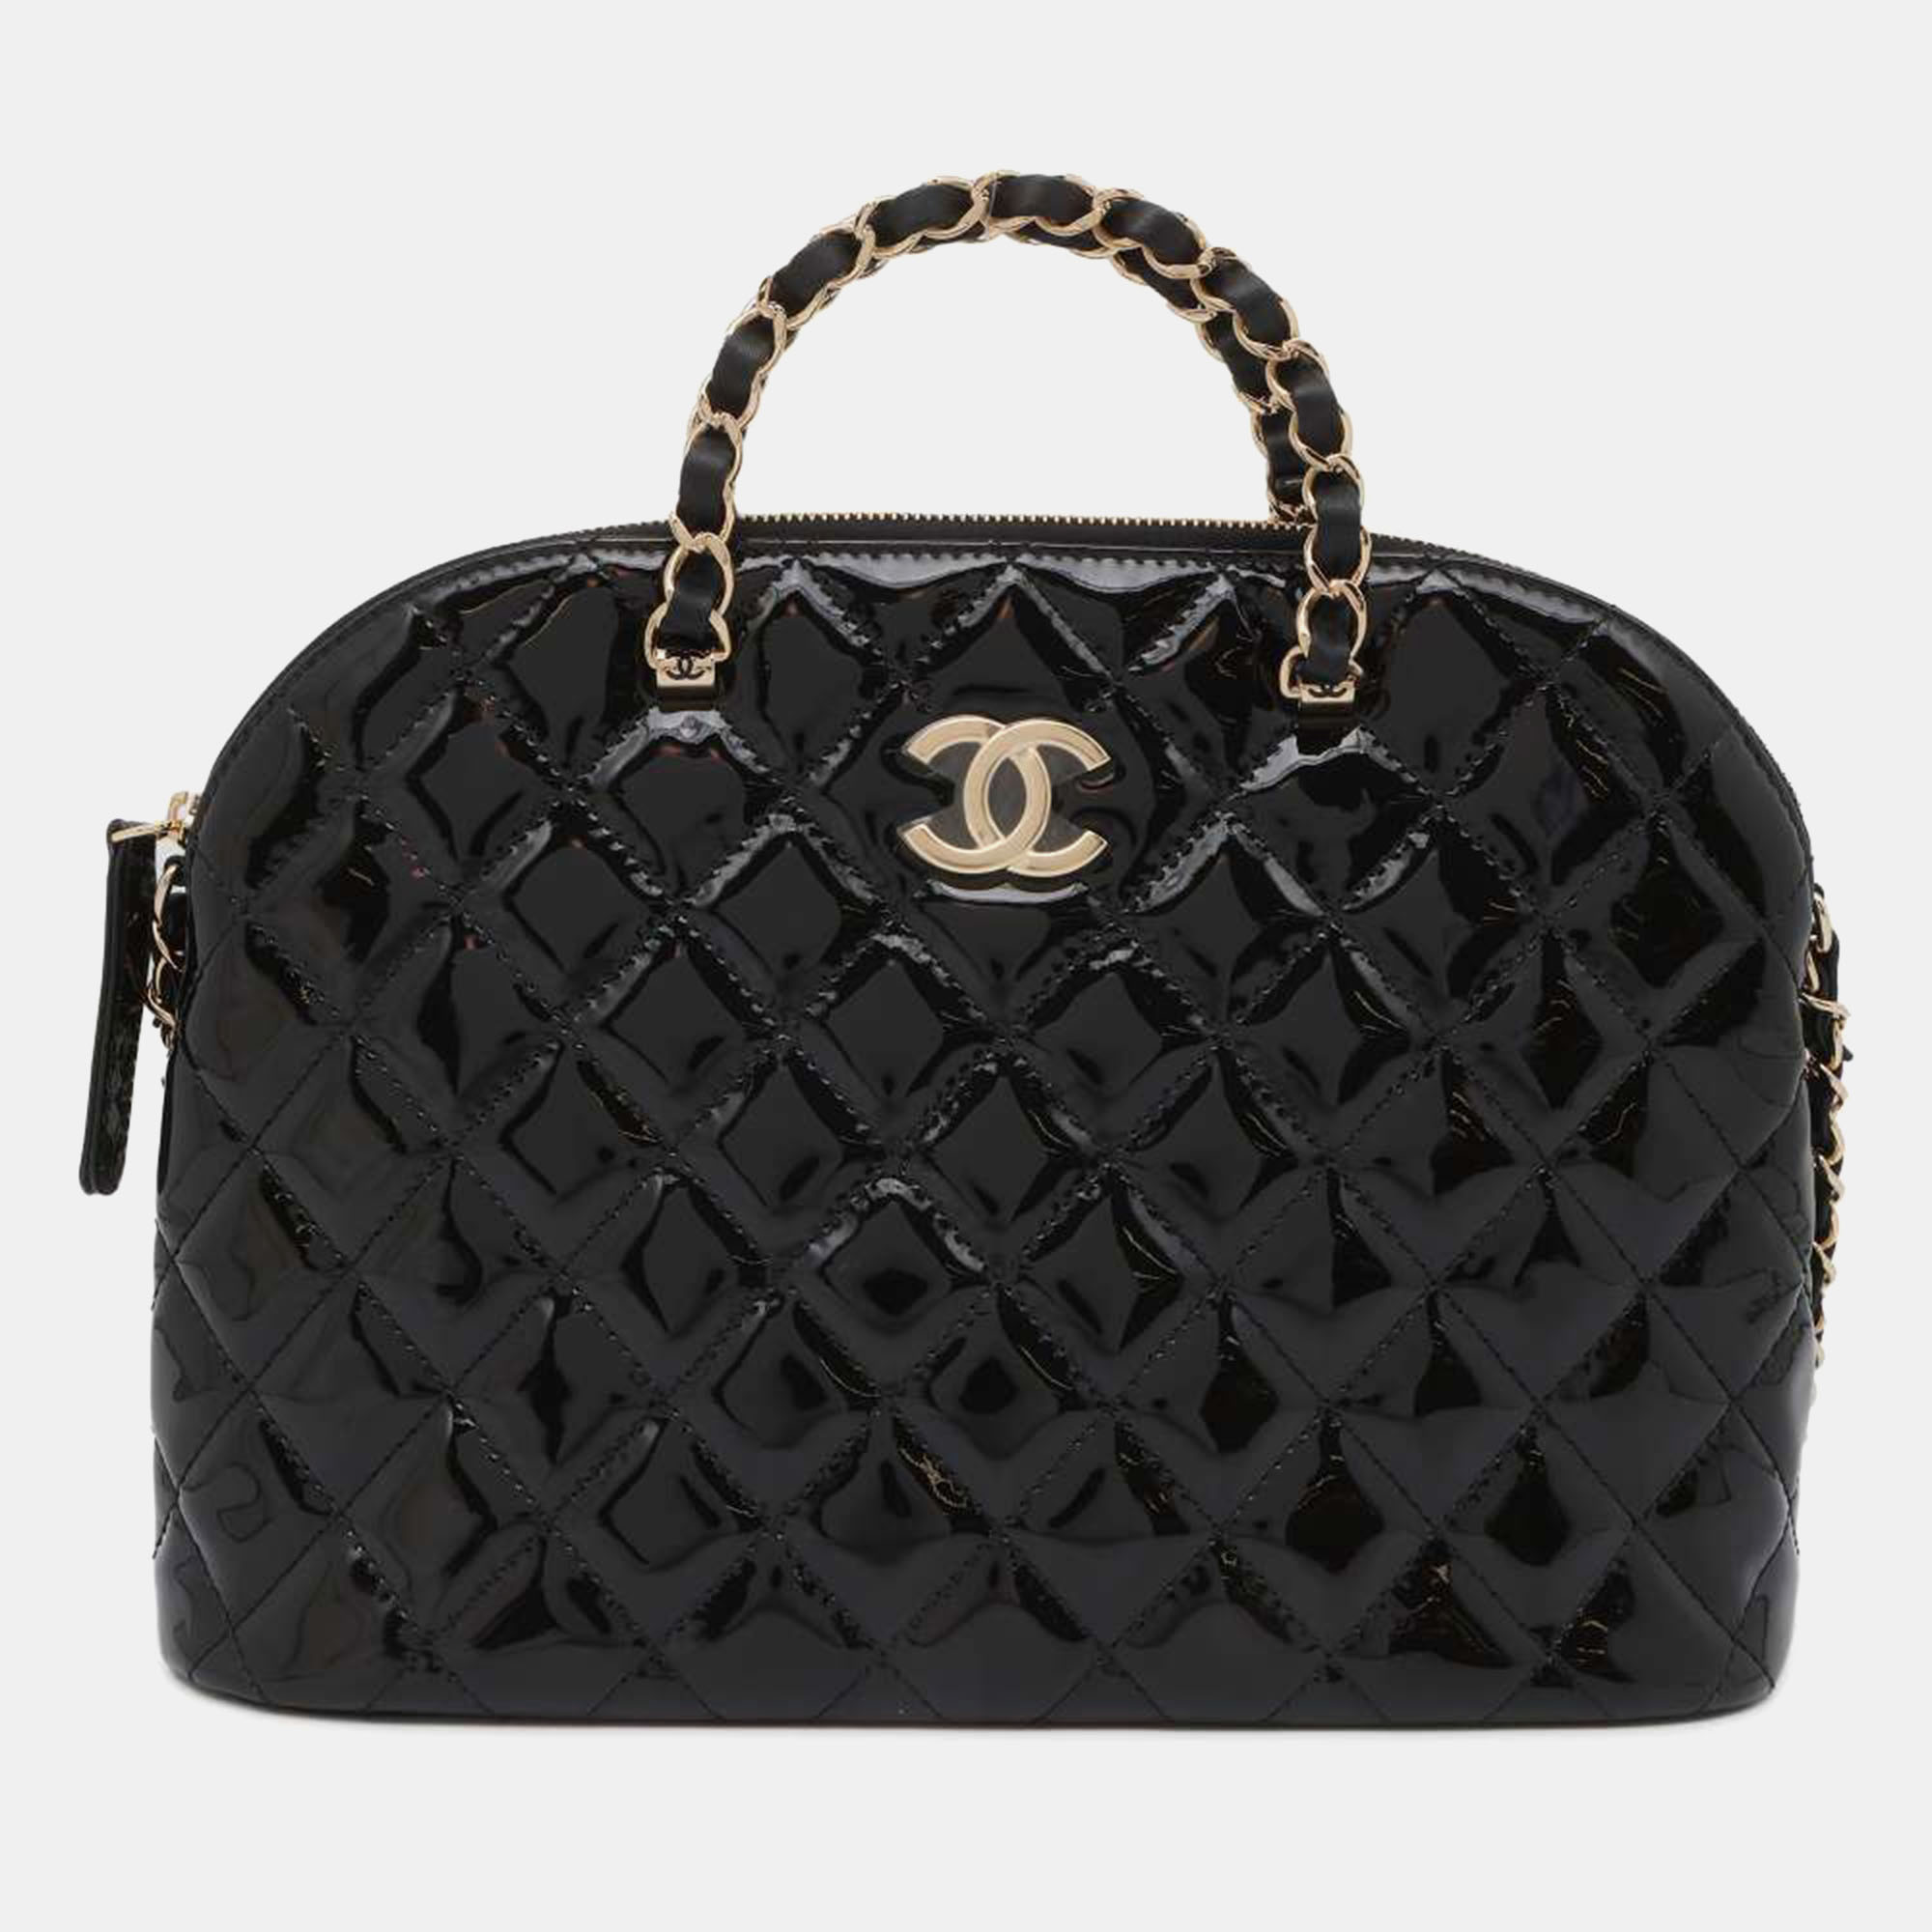 Chanel black patent leather top handle bag